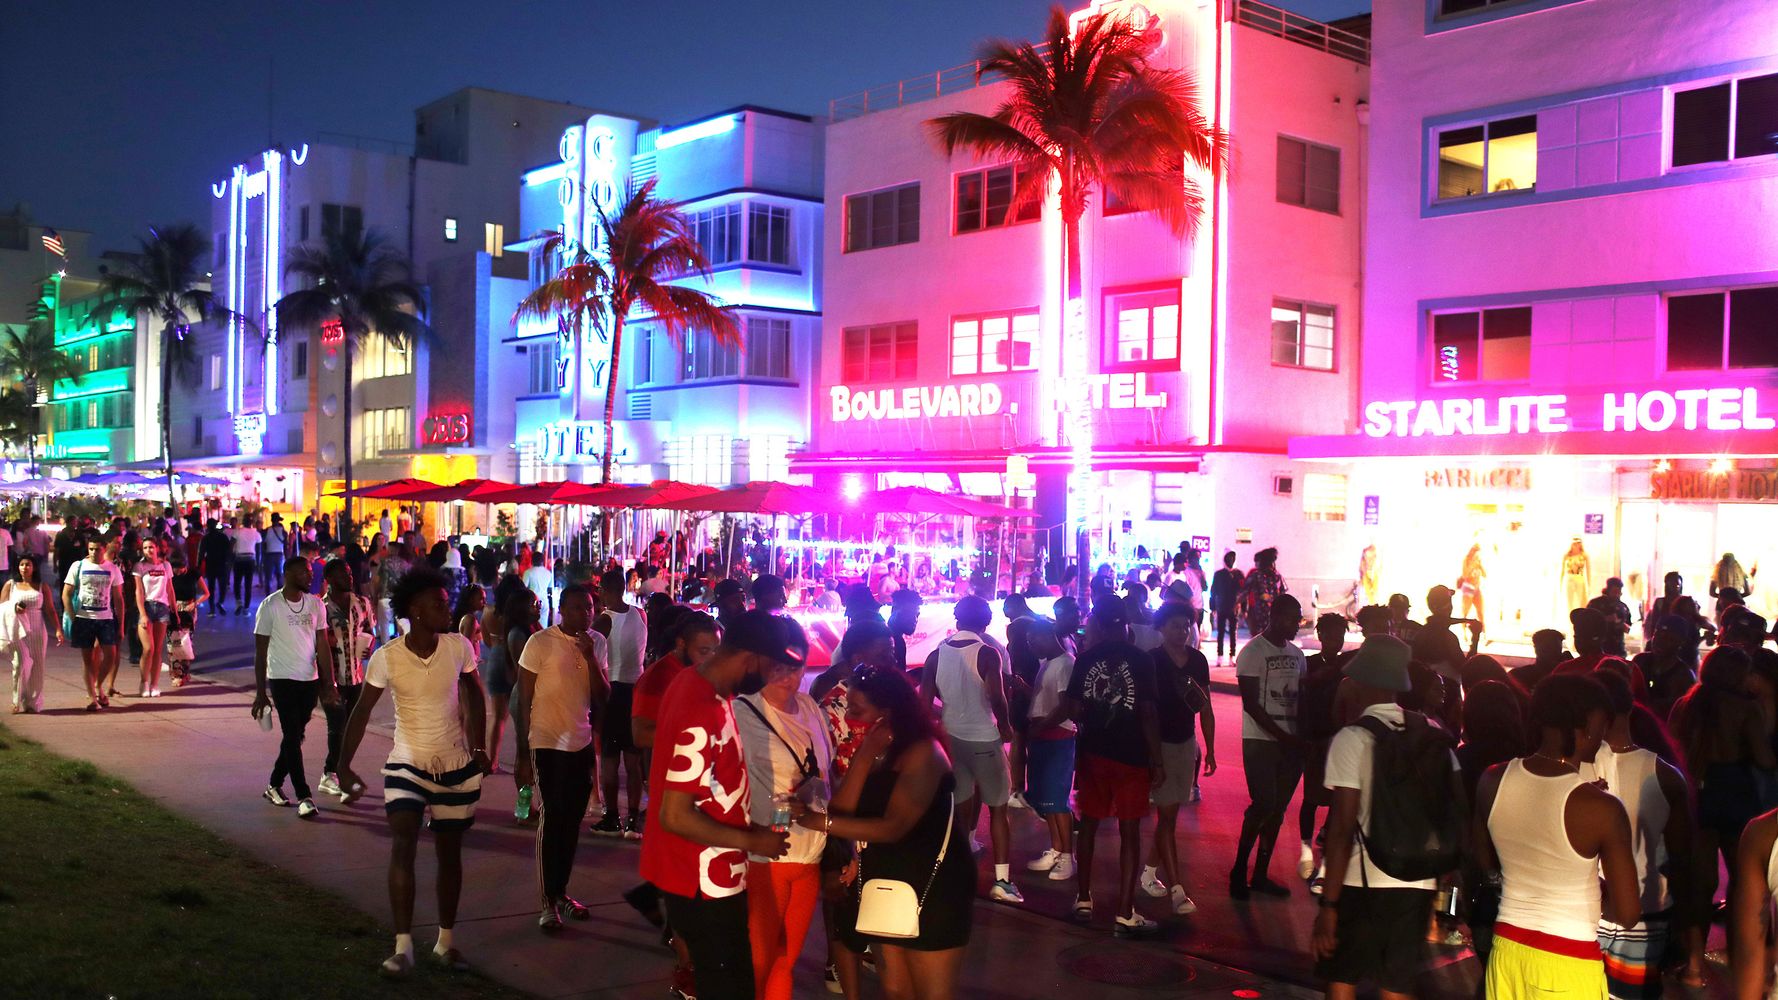 Miami Beach Declares State Of Emergency Over Out-Of-Control Spring Breakers